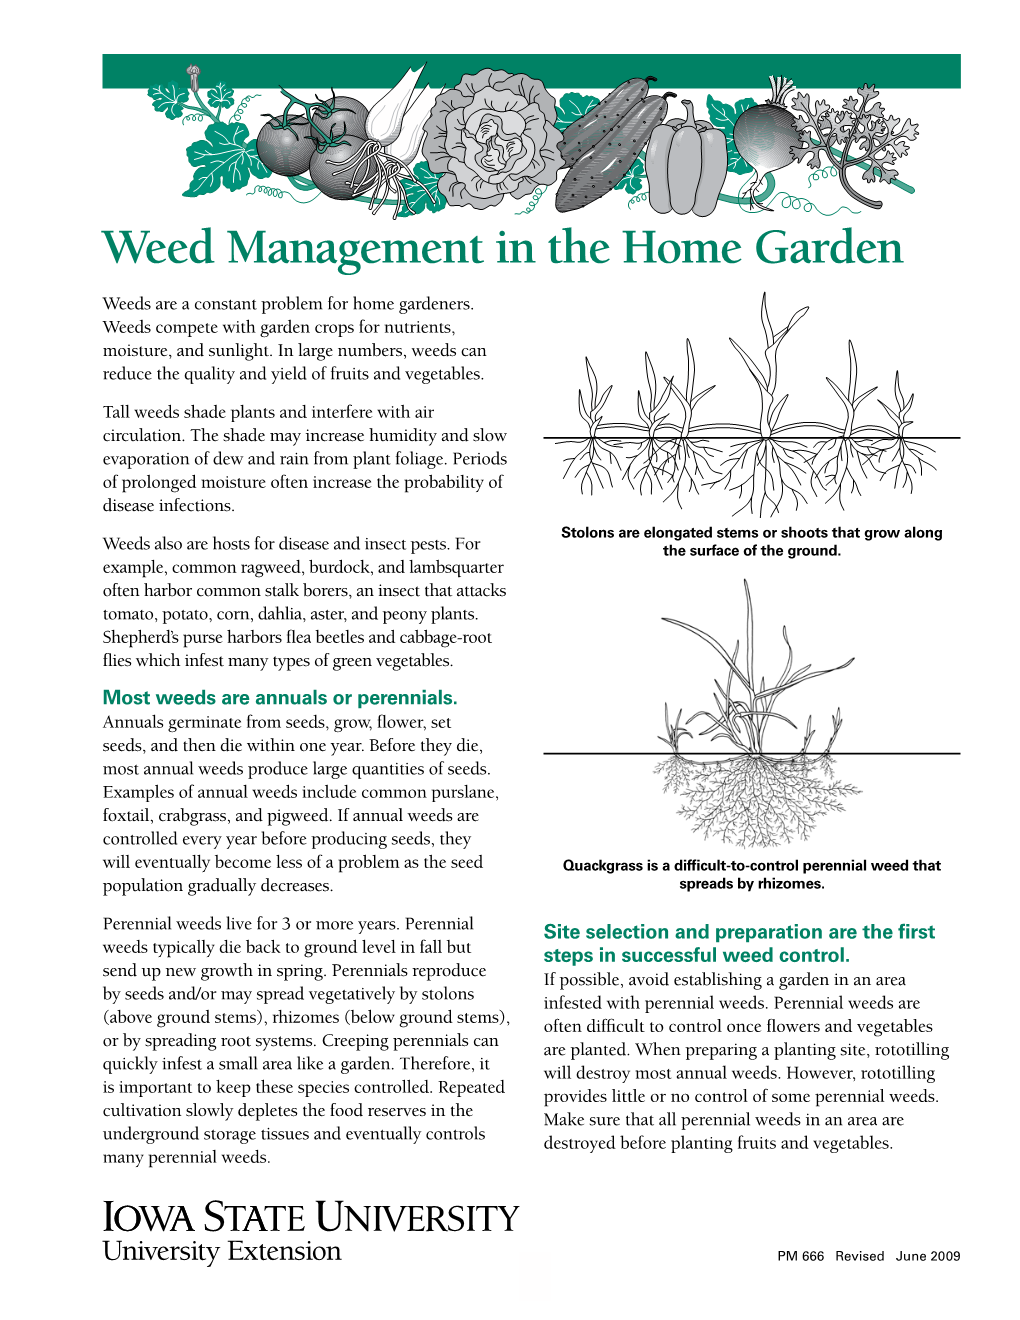 Weed Management in the Home Garden